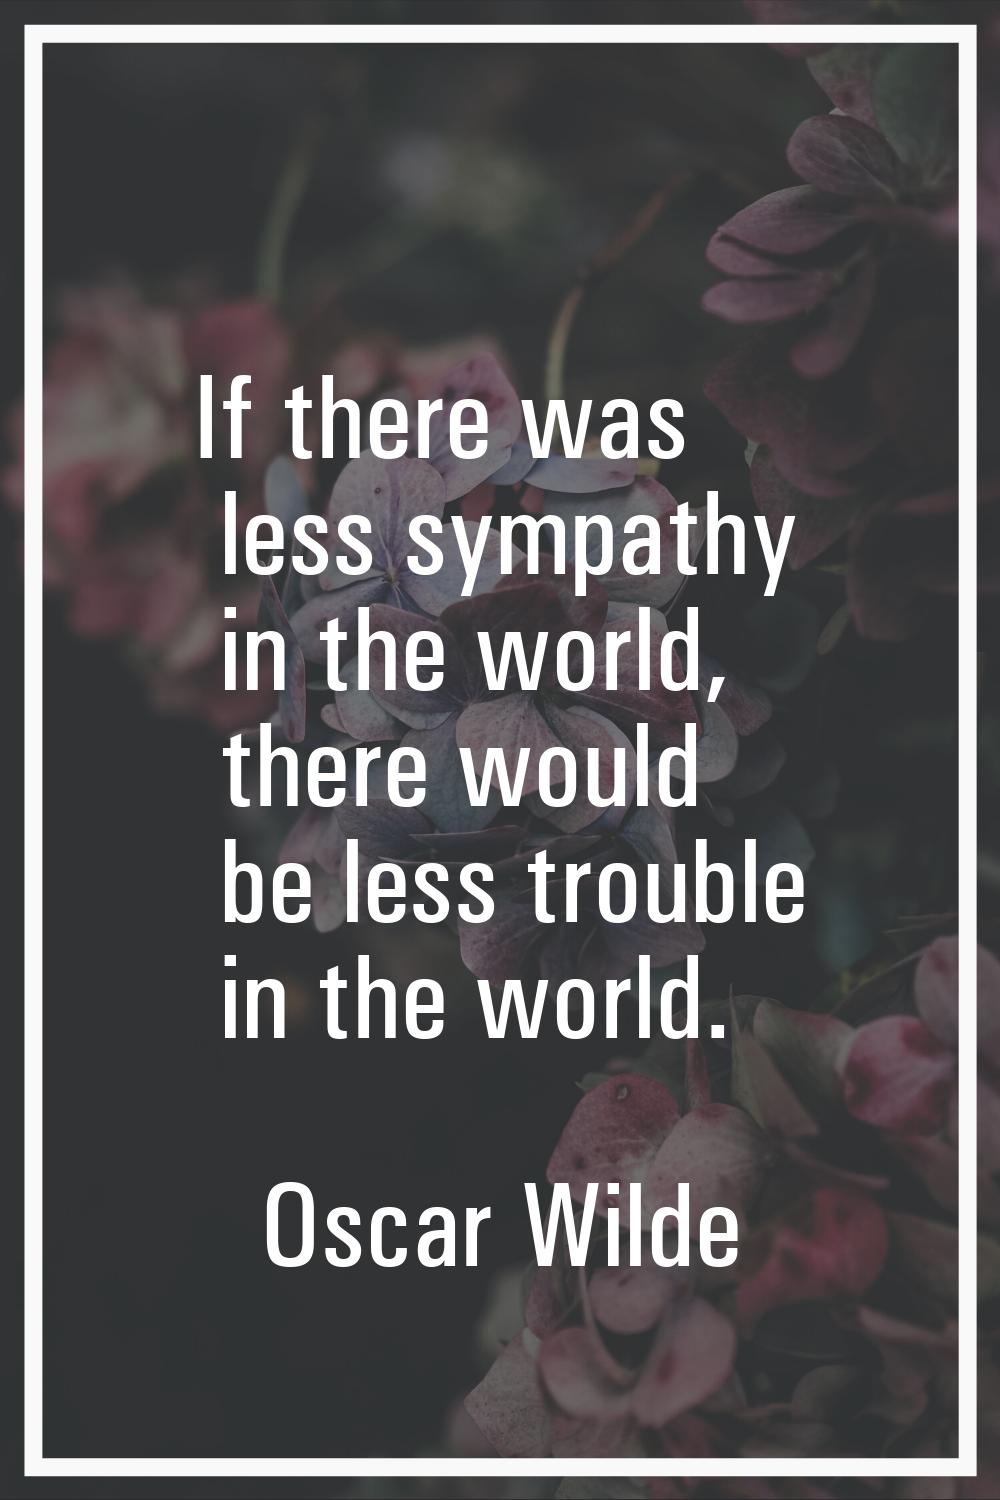 If there was less sympathy in the world, there would be less trouble in the world.